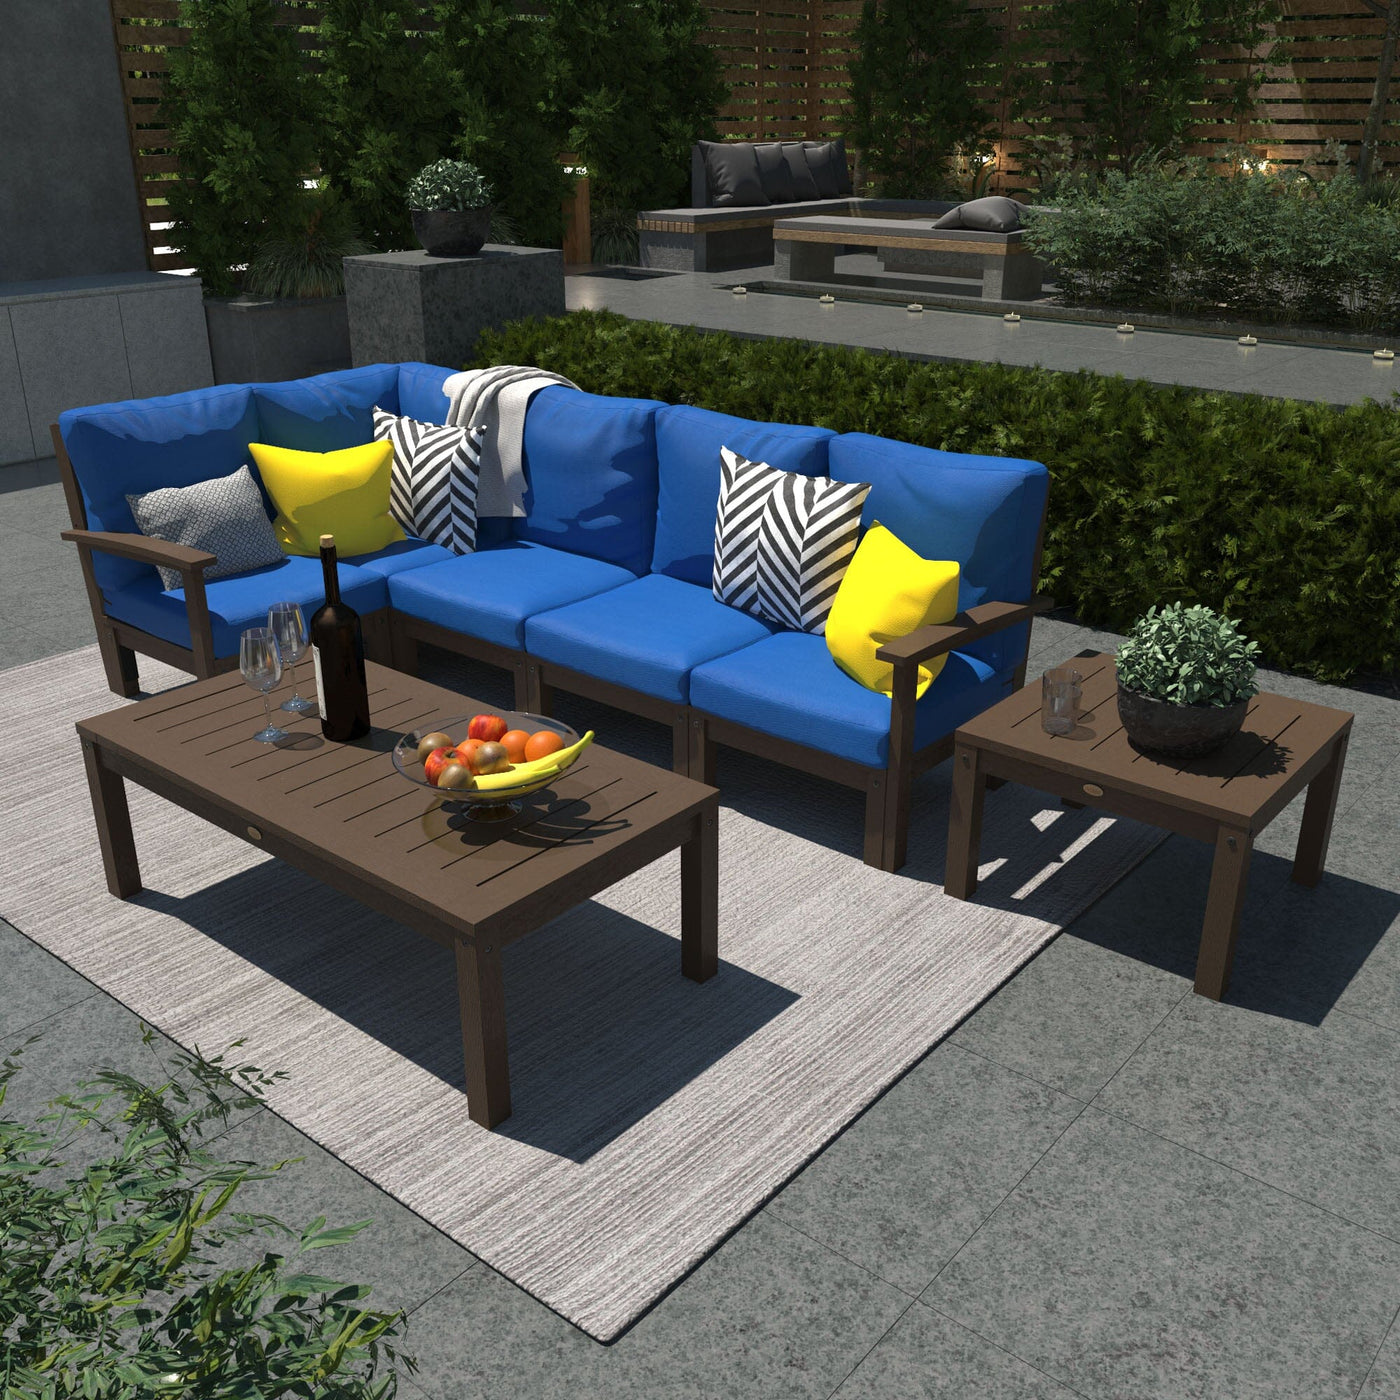 Bespoke Deep Seating: 7 Piece Sectional Set with Conversation and Side Table Deep Seating Highwood USA 